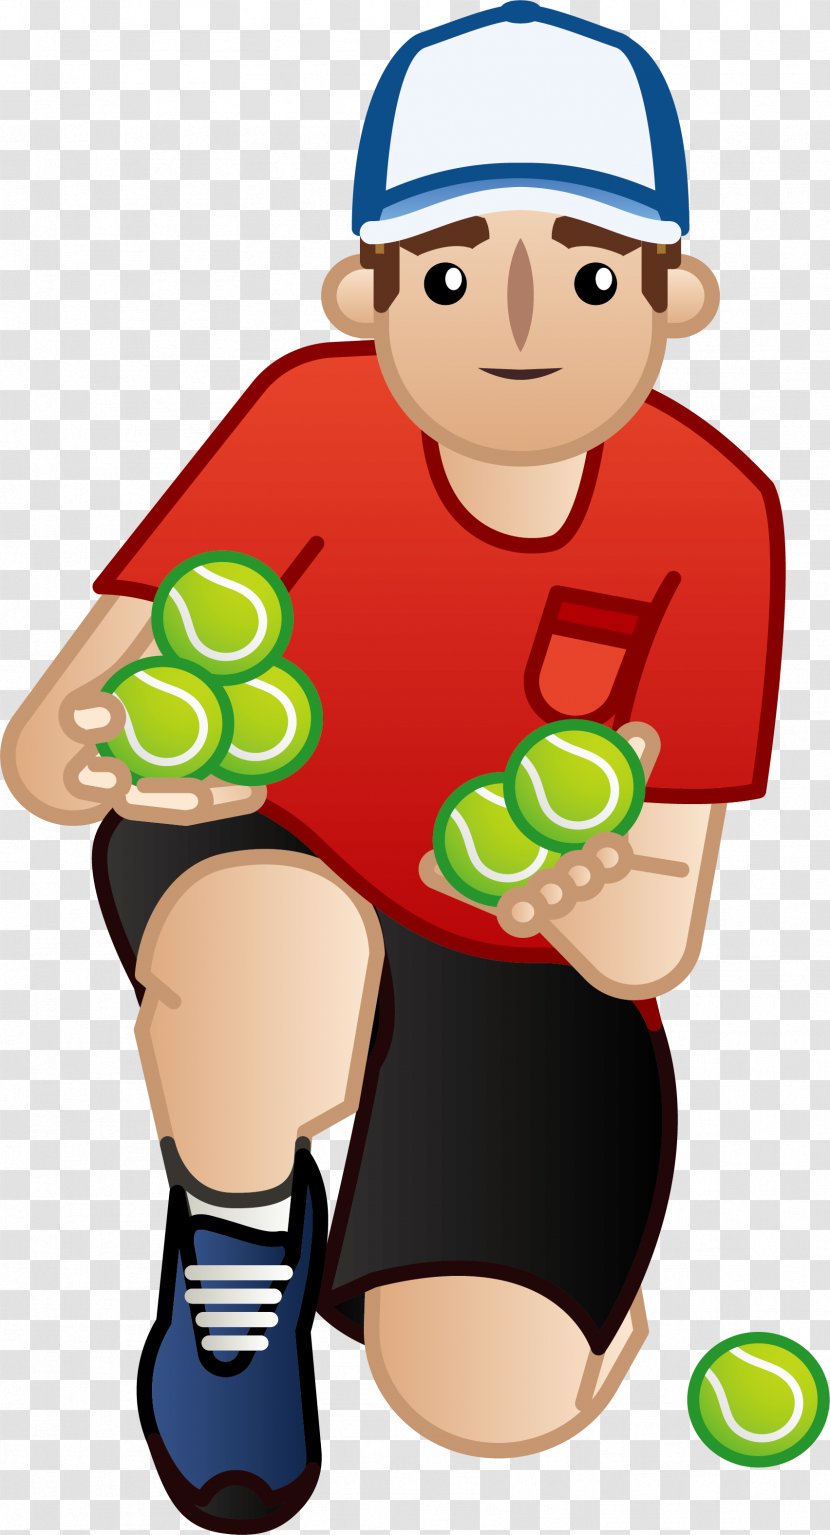 The US Open (Tennis) Tennis Centre Clip Art - Court Picking Up Players Transparent PNG